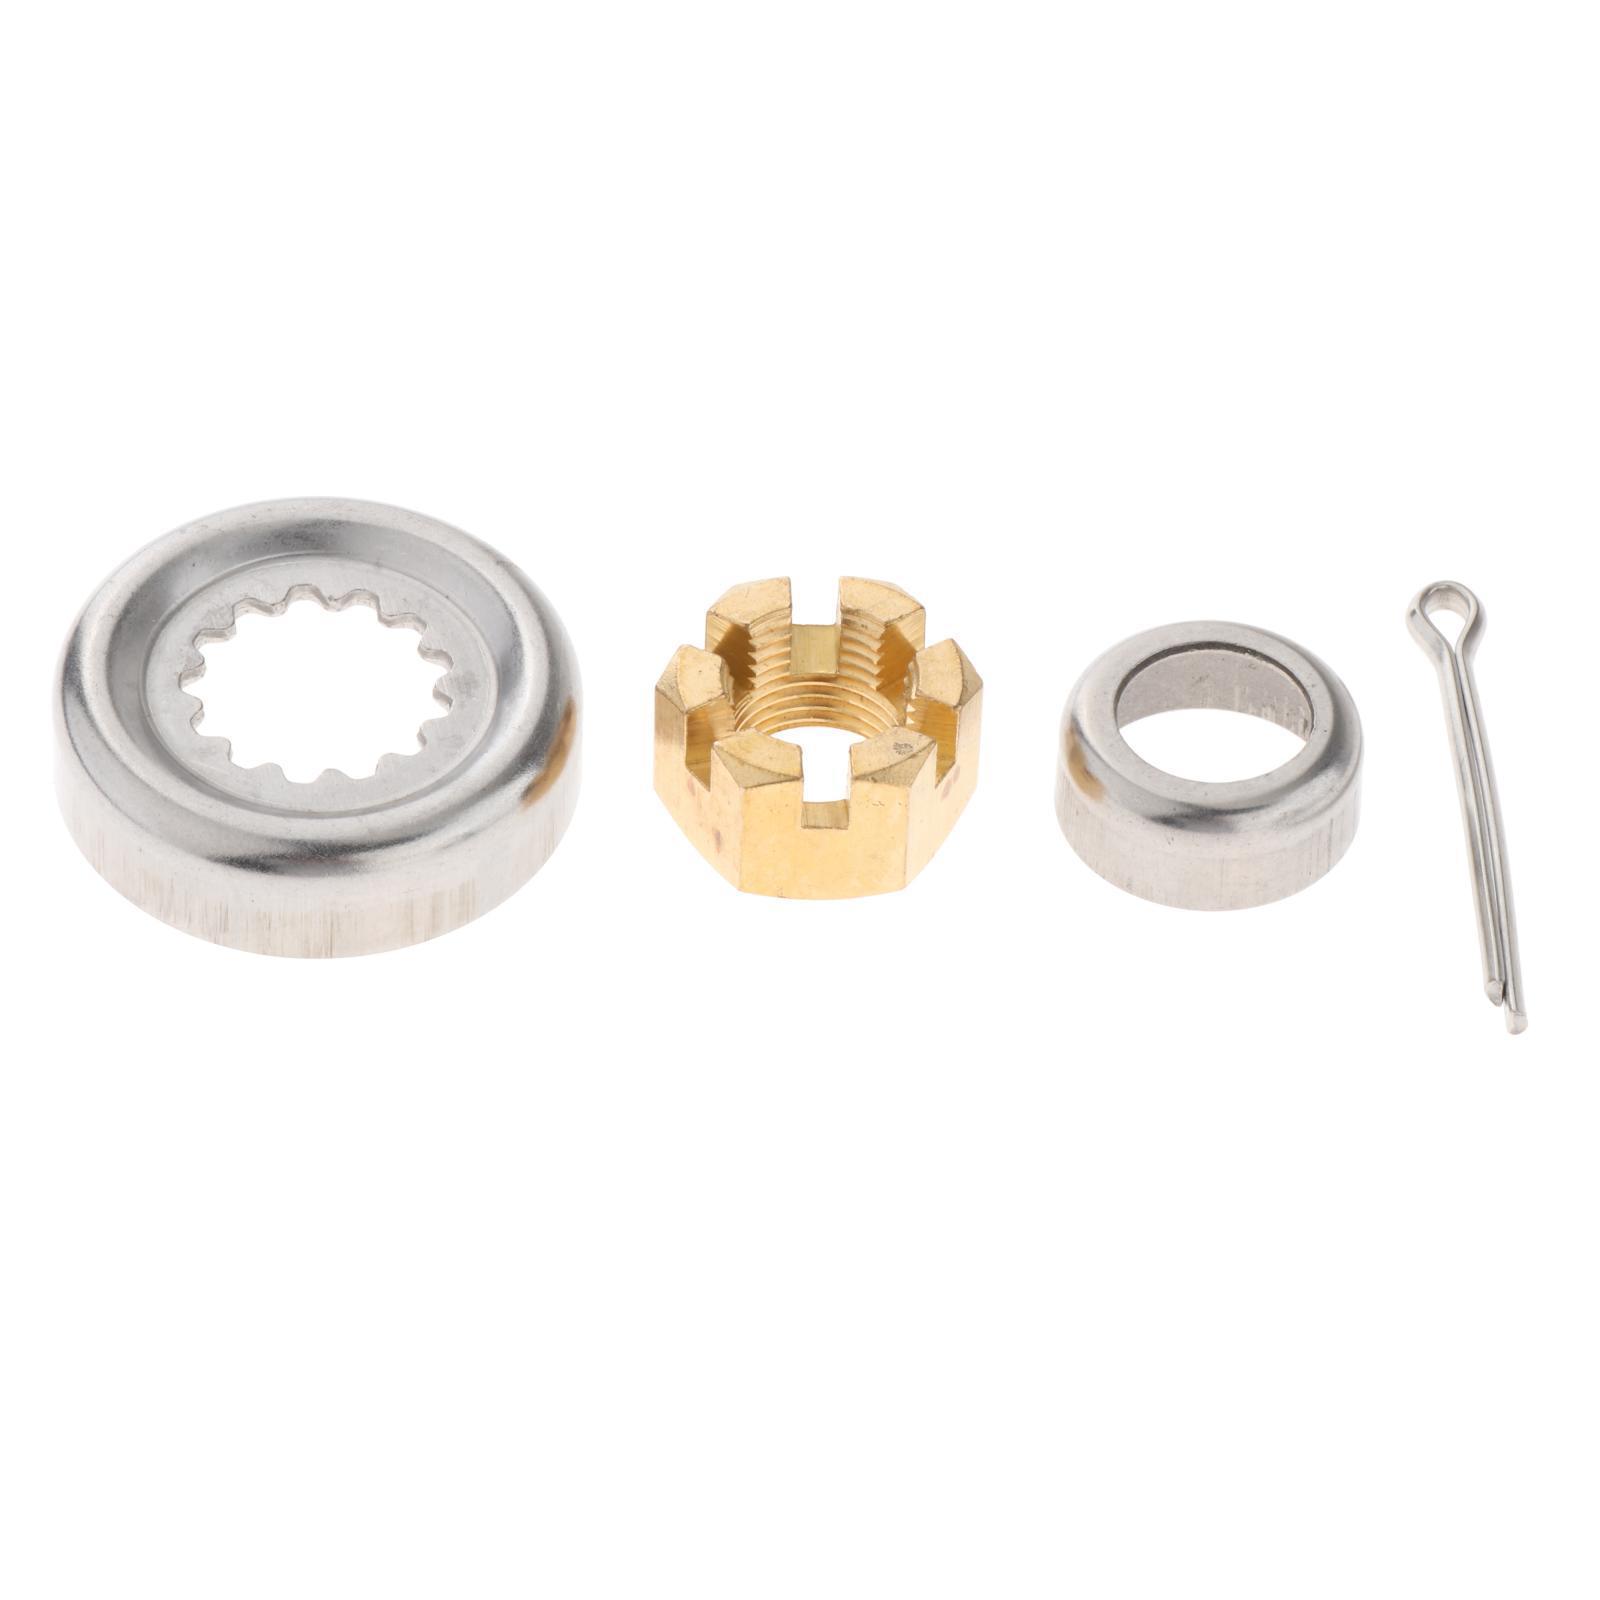 Propeller Spacer Kit, 90389-22M01 Bush 66T-45997-00 Spacer 90171-16011 Castle Nut for Yamaha F30-F60 4T/2T Direct Replaces Accessories